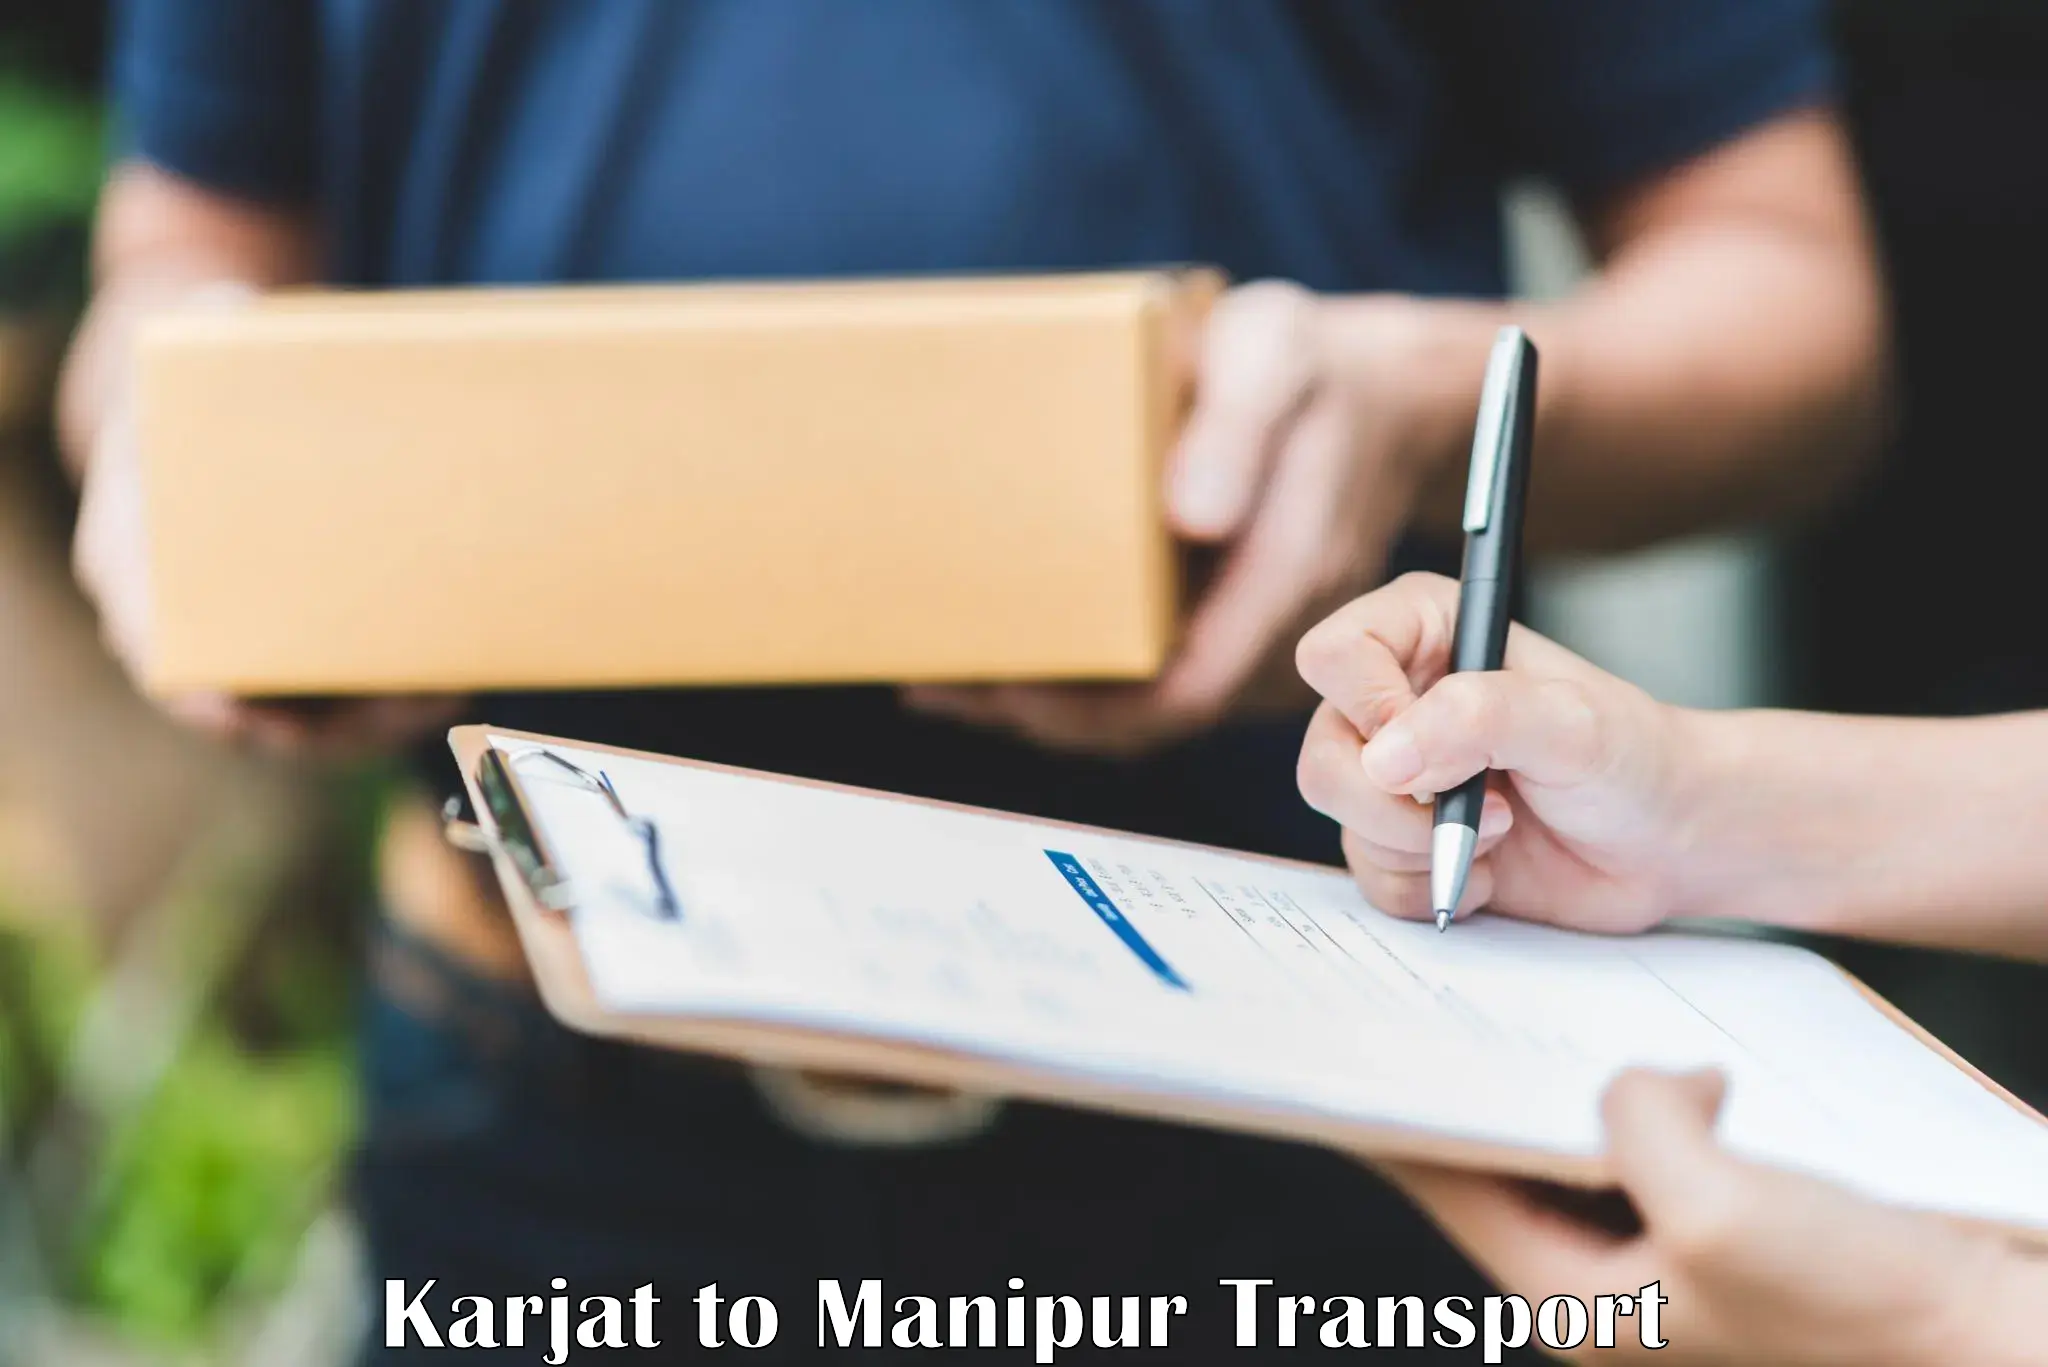 Container transport service Karjat to Kanti